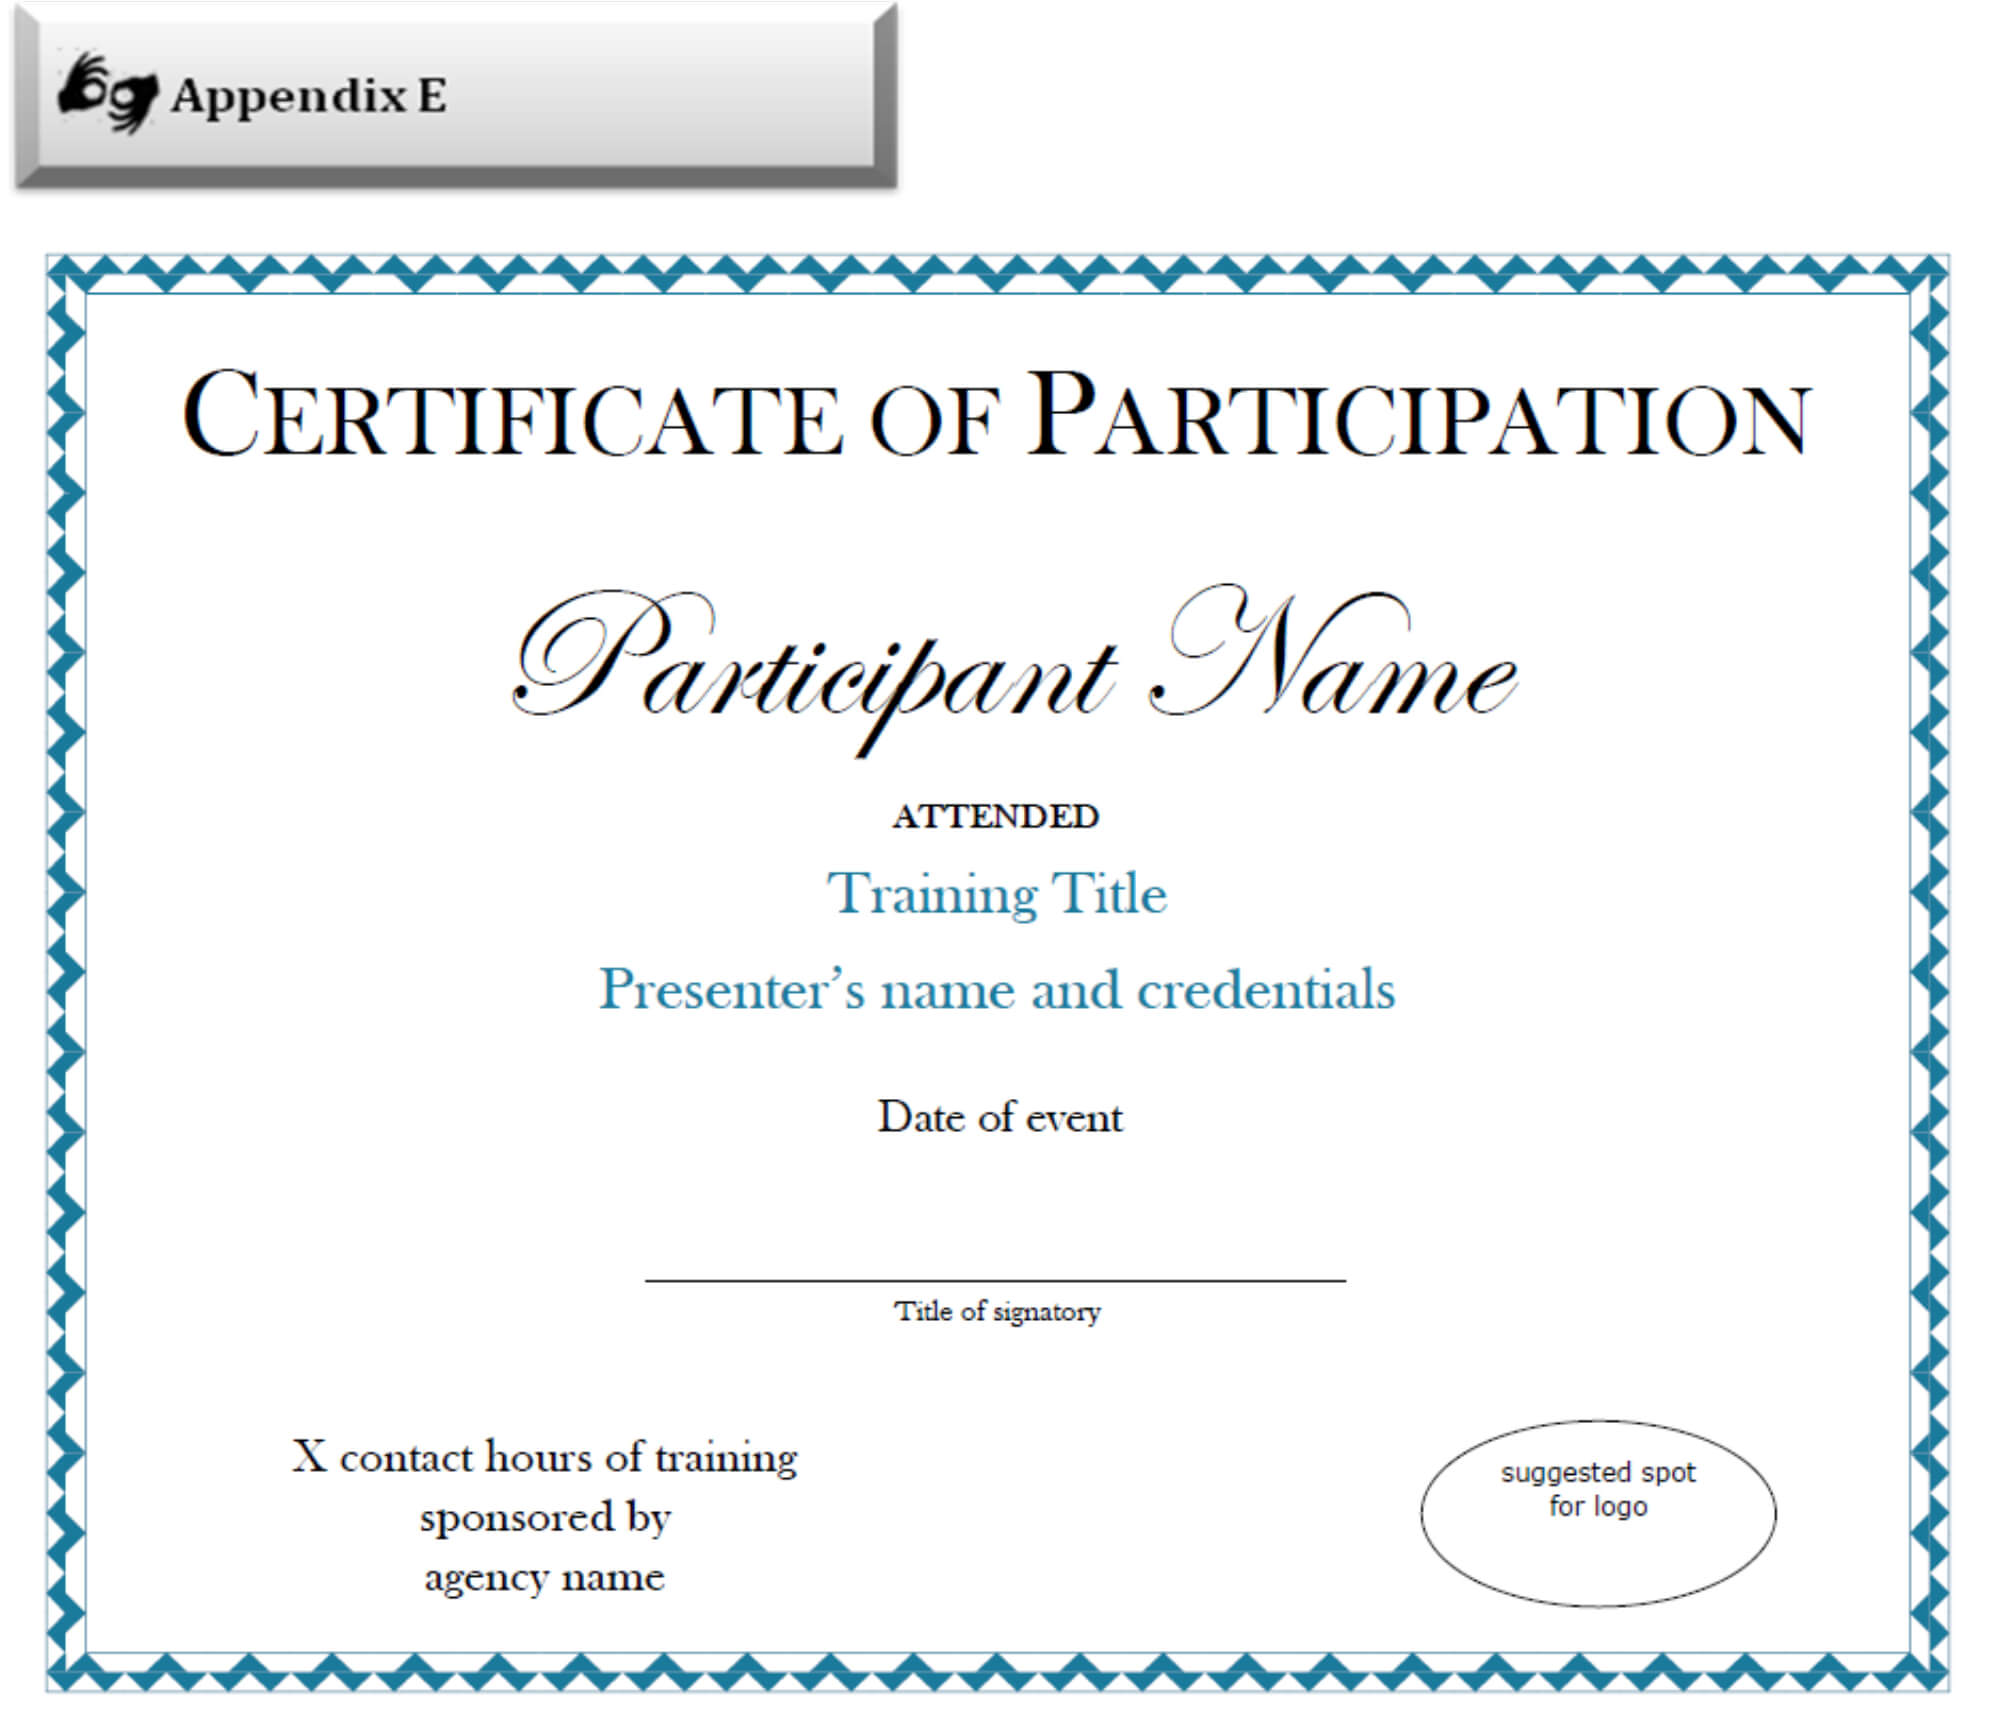 Certificate Of Participation Sample Free Download Throughout Sample Certificate Of Participation Template